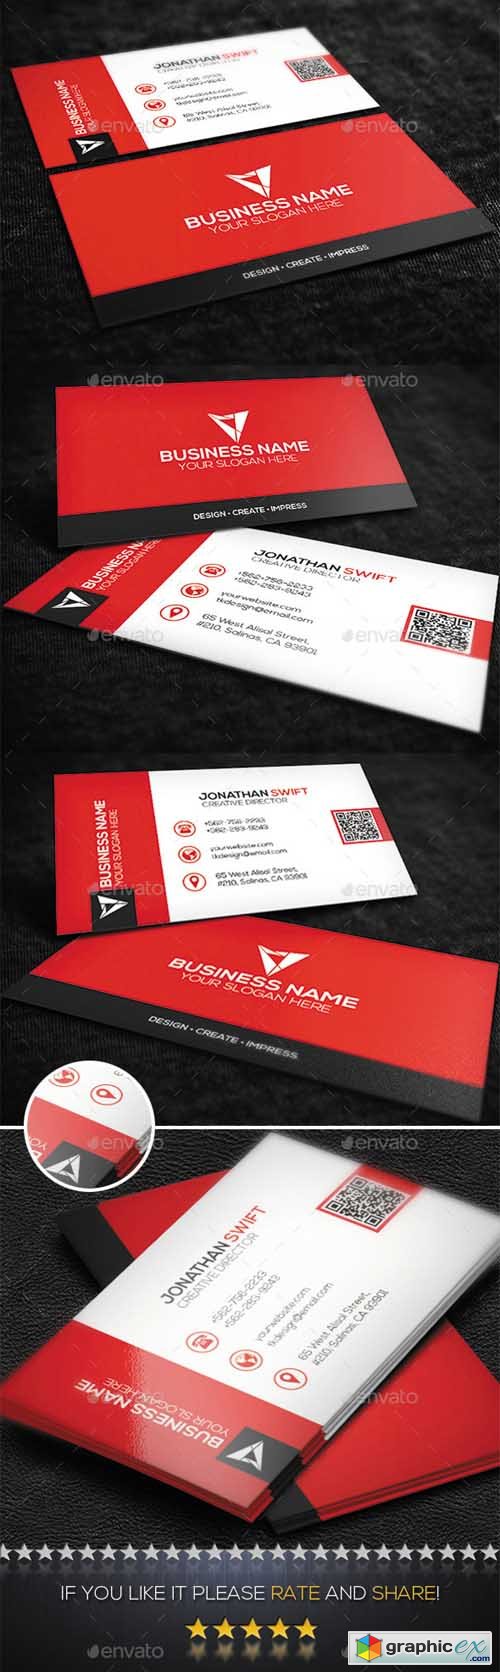 Red Corporate Business Card No.09